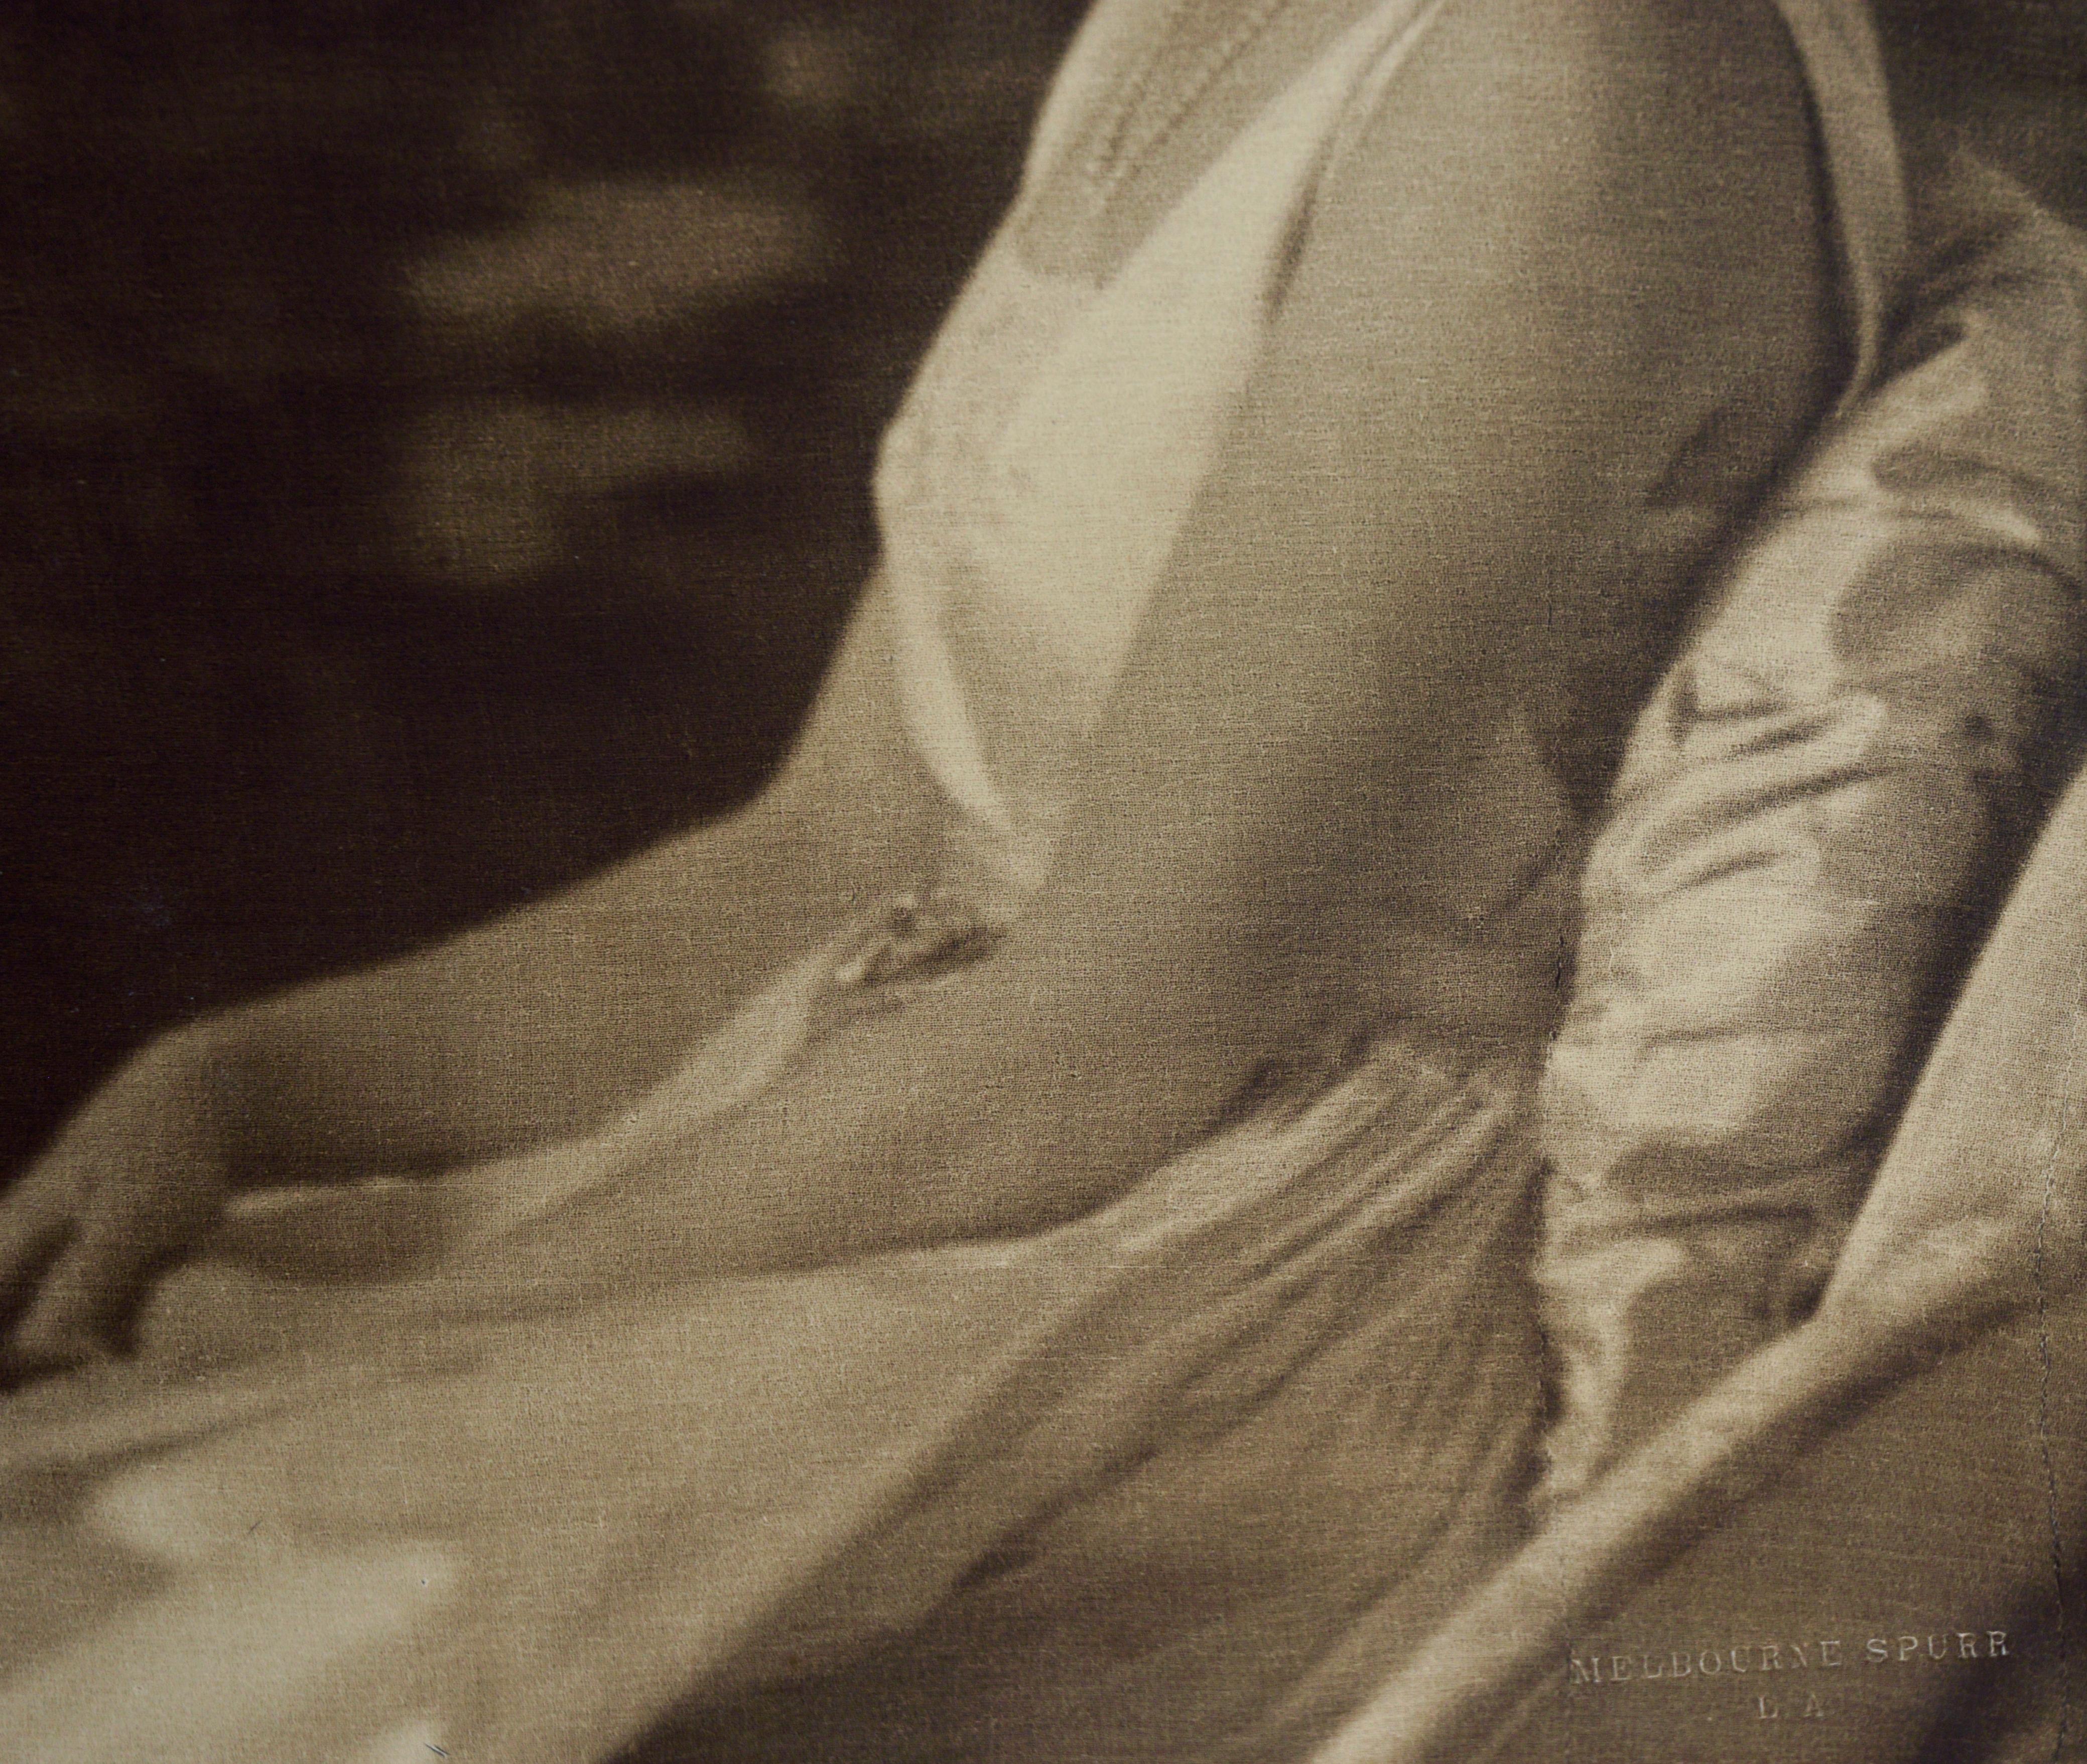 Photograph of Mary Pickford - Melbourne Spurr Photography

Photograph depicting Mary Pickford by Hollywood photographer Melbourne Spurr (Canadian-American, 1892-1979). Mary Pickford is depicted wearing a white sleeveless dress, sitting in a lounge